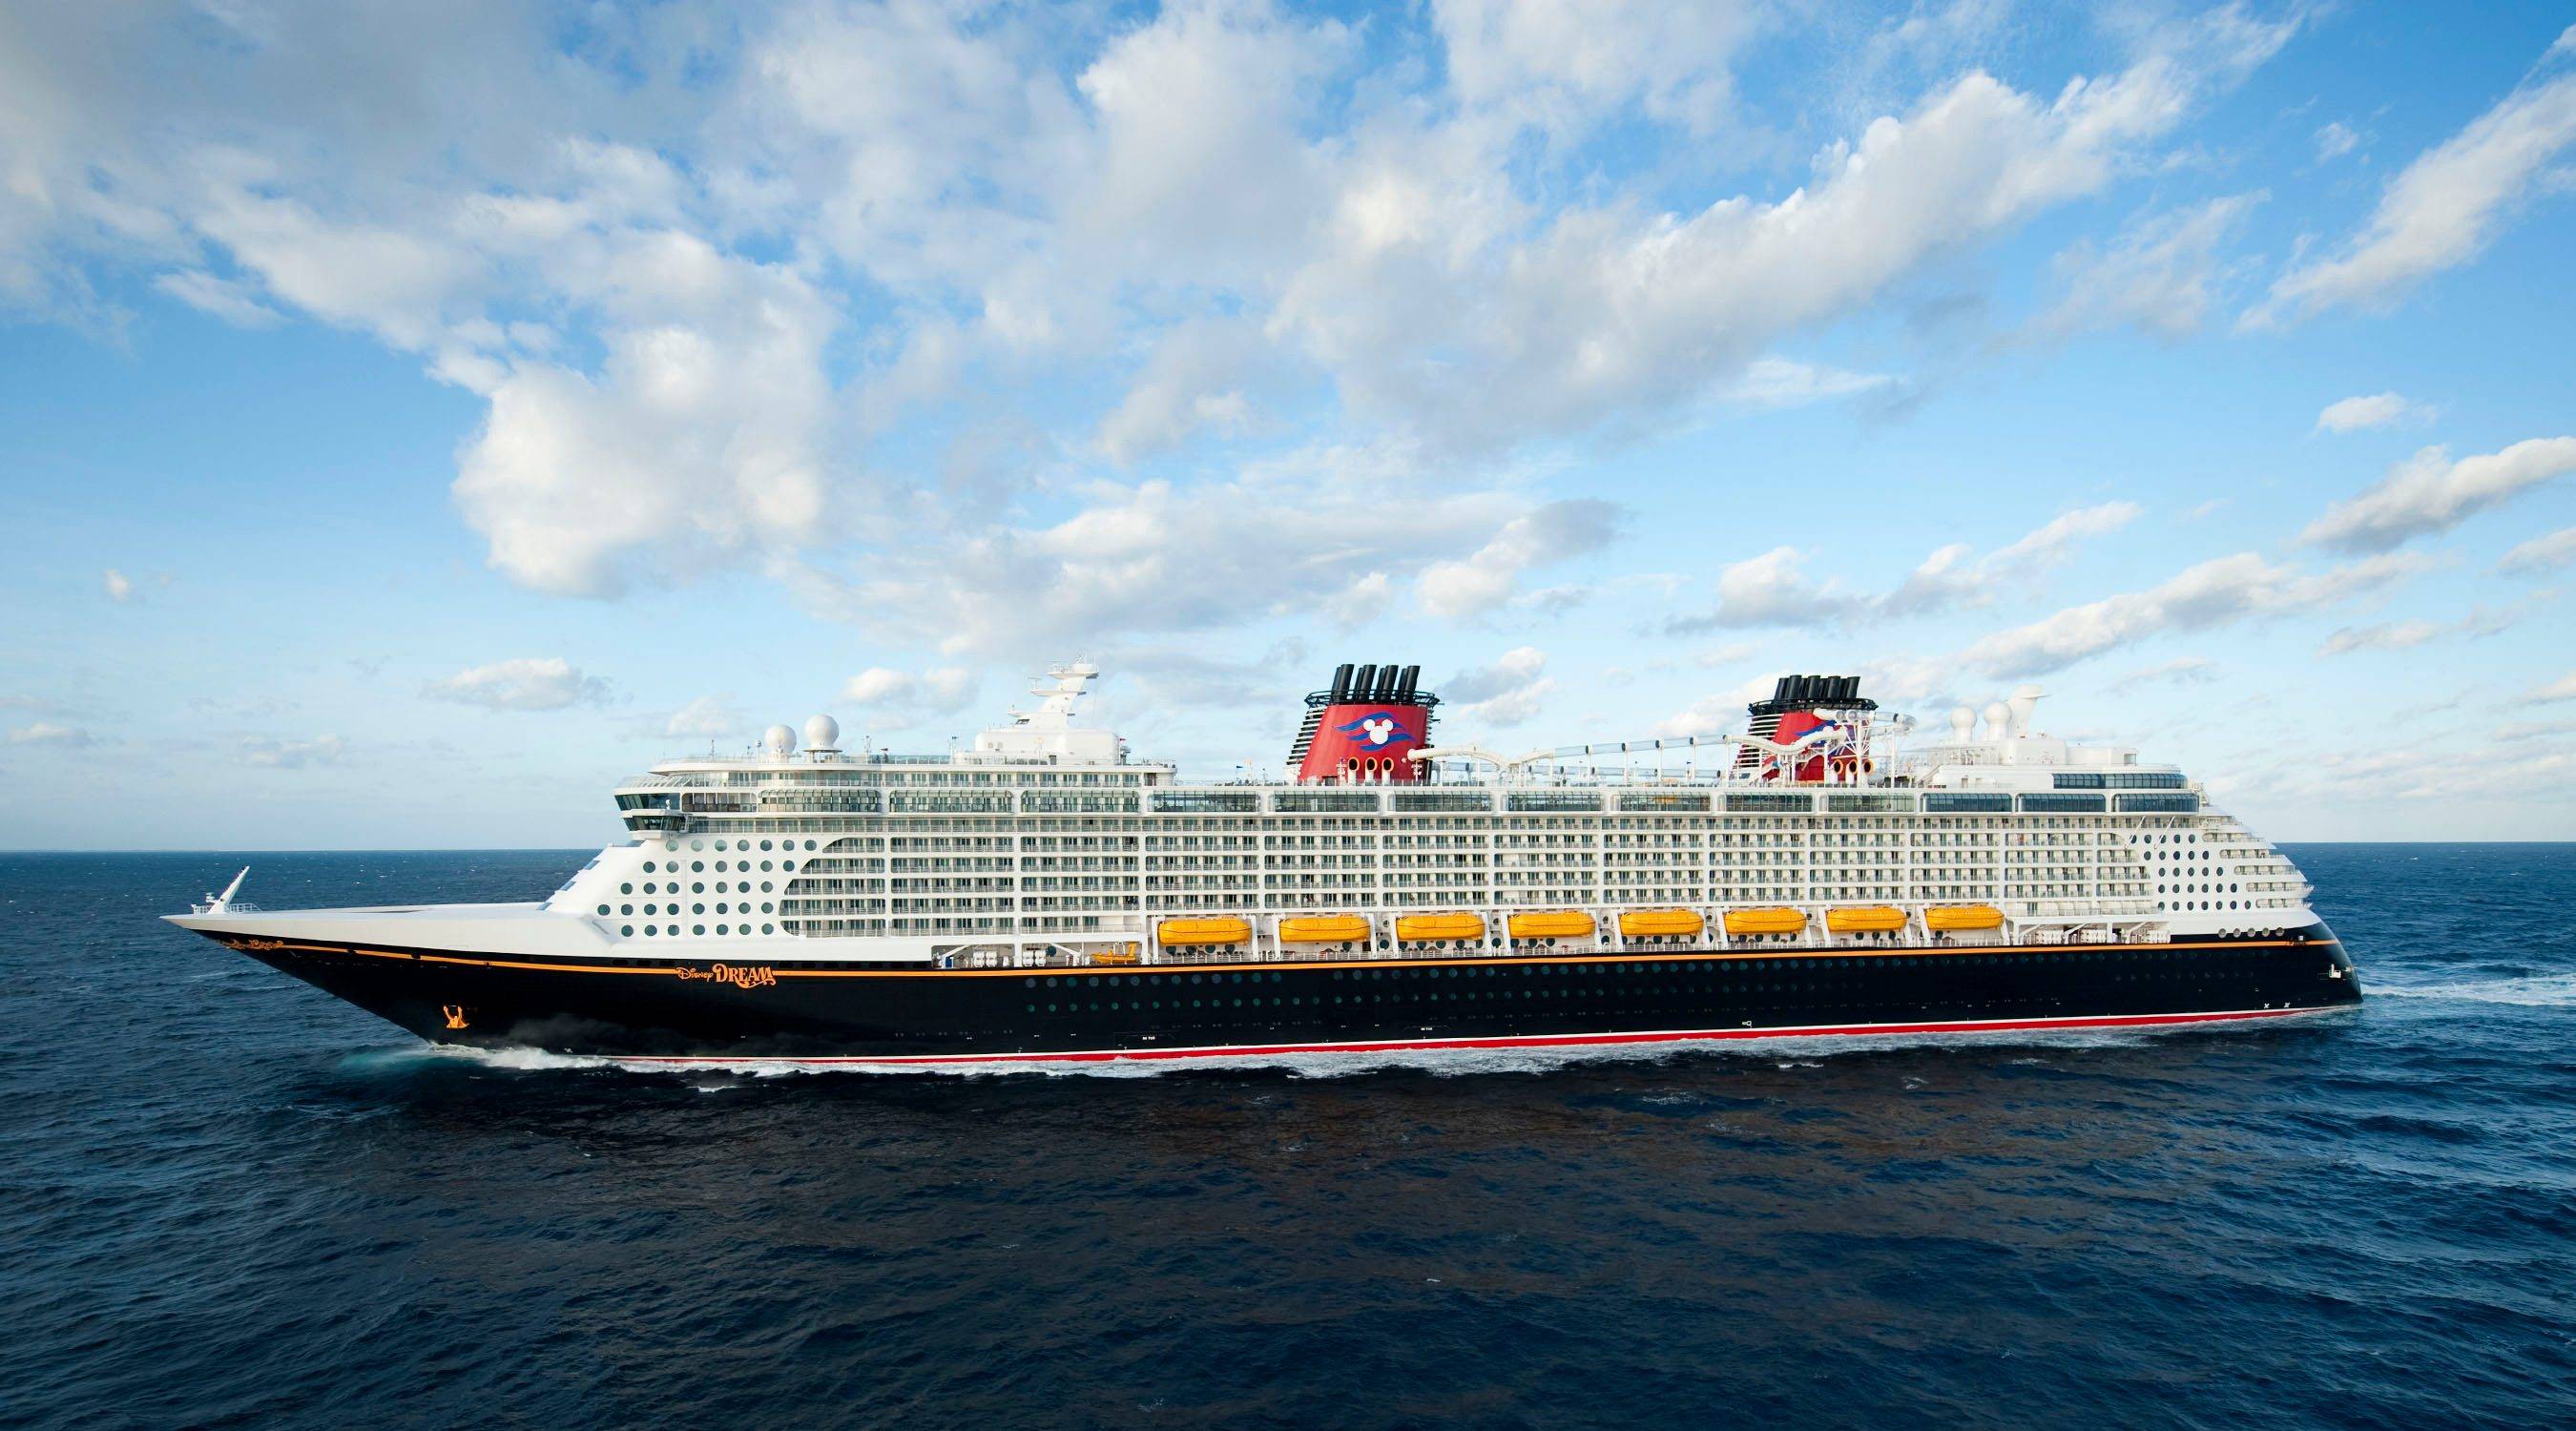 Disney Cruise Line will soon require COVID-19 vaccinations for ages 5 and up